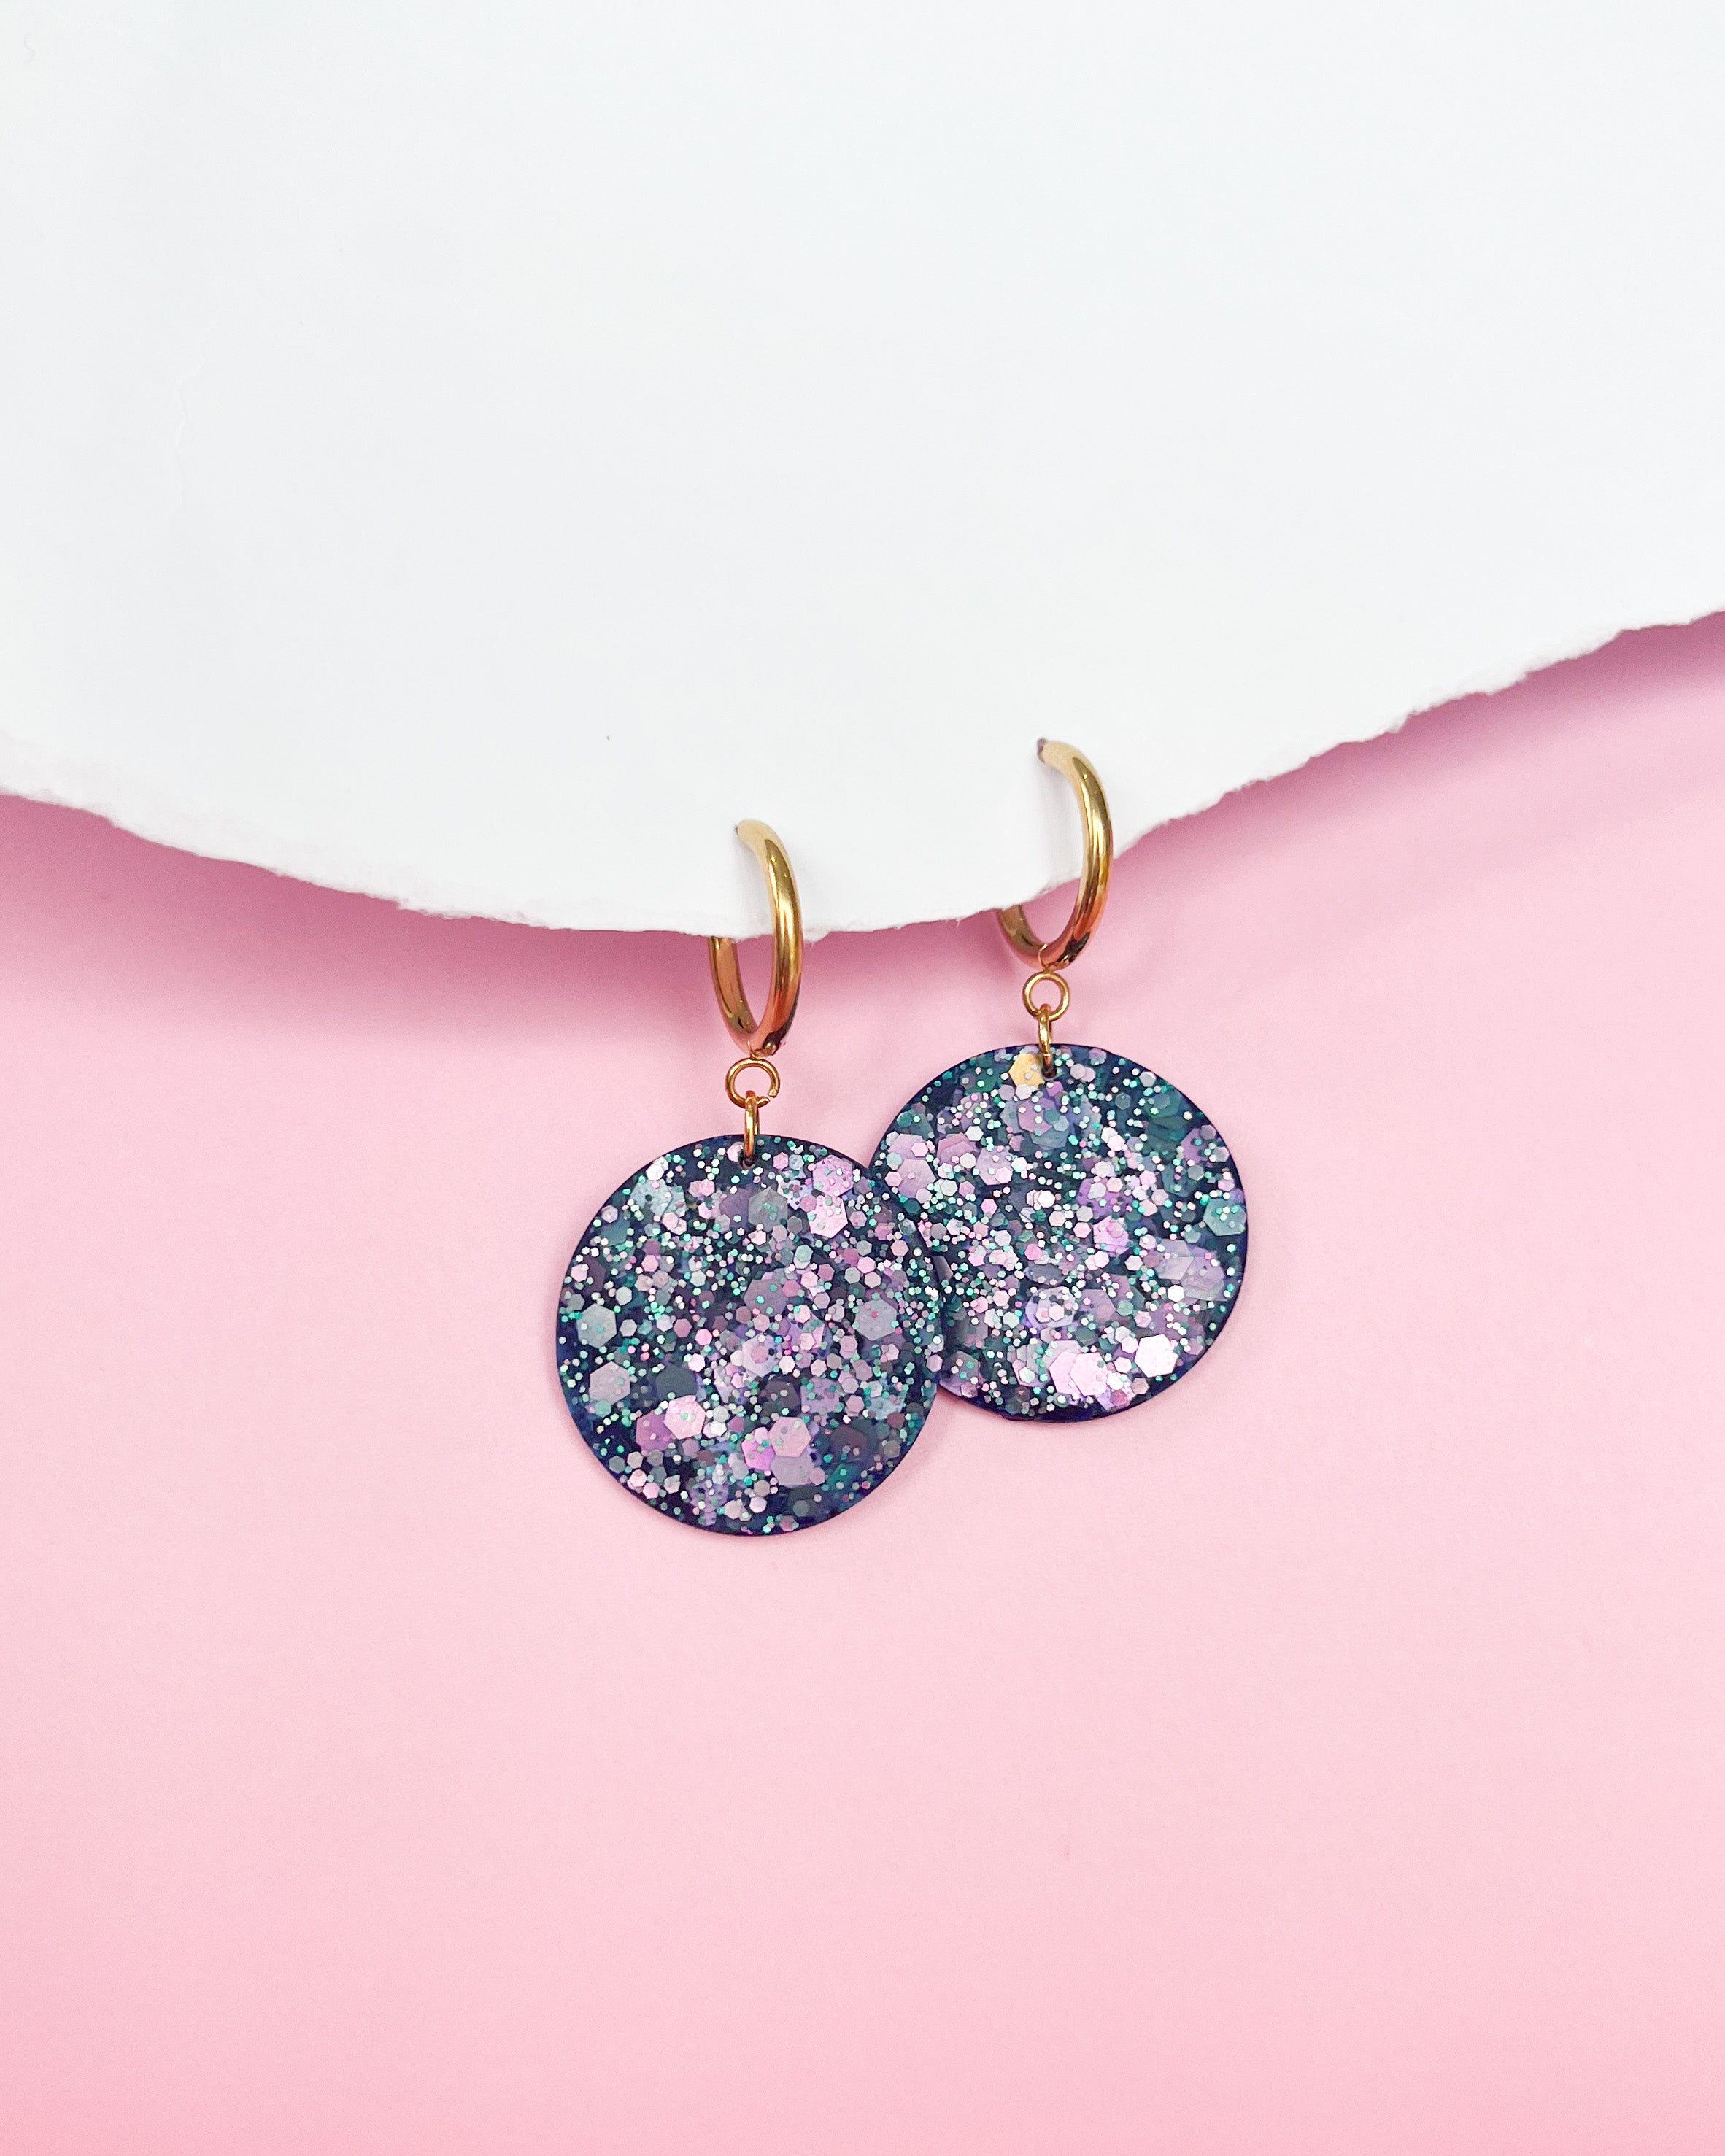 Delicate fashion statement earrings made from crystal resin